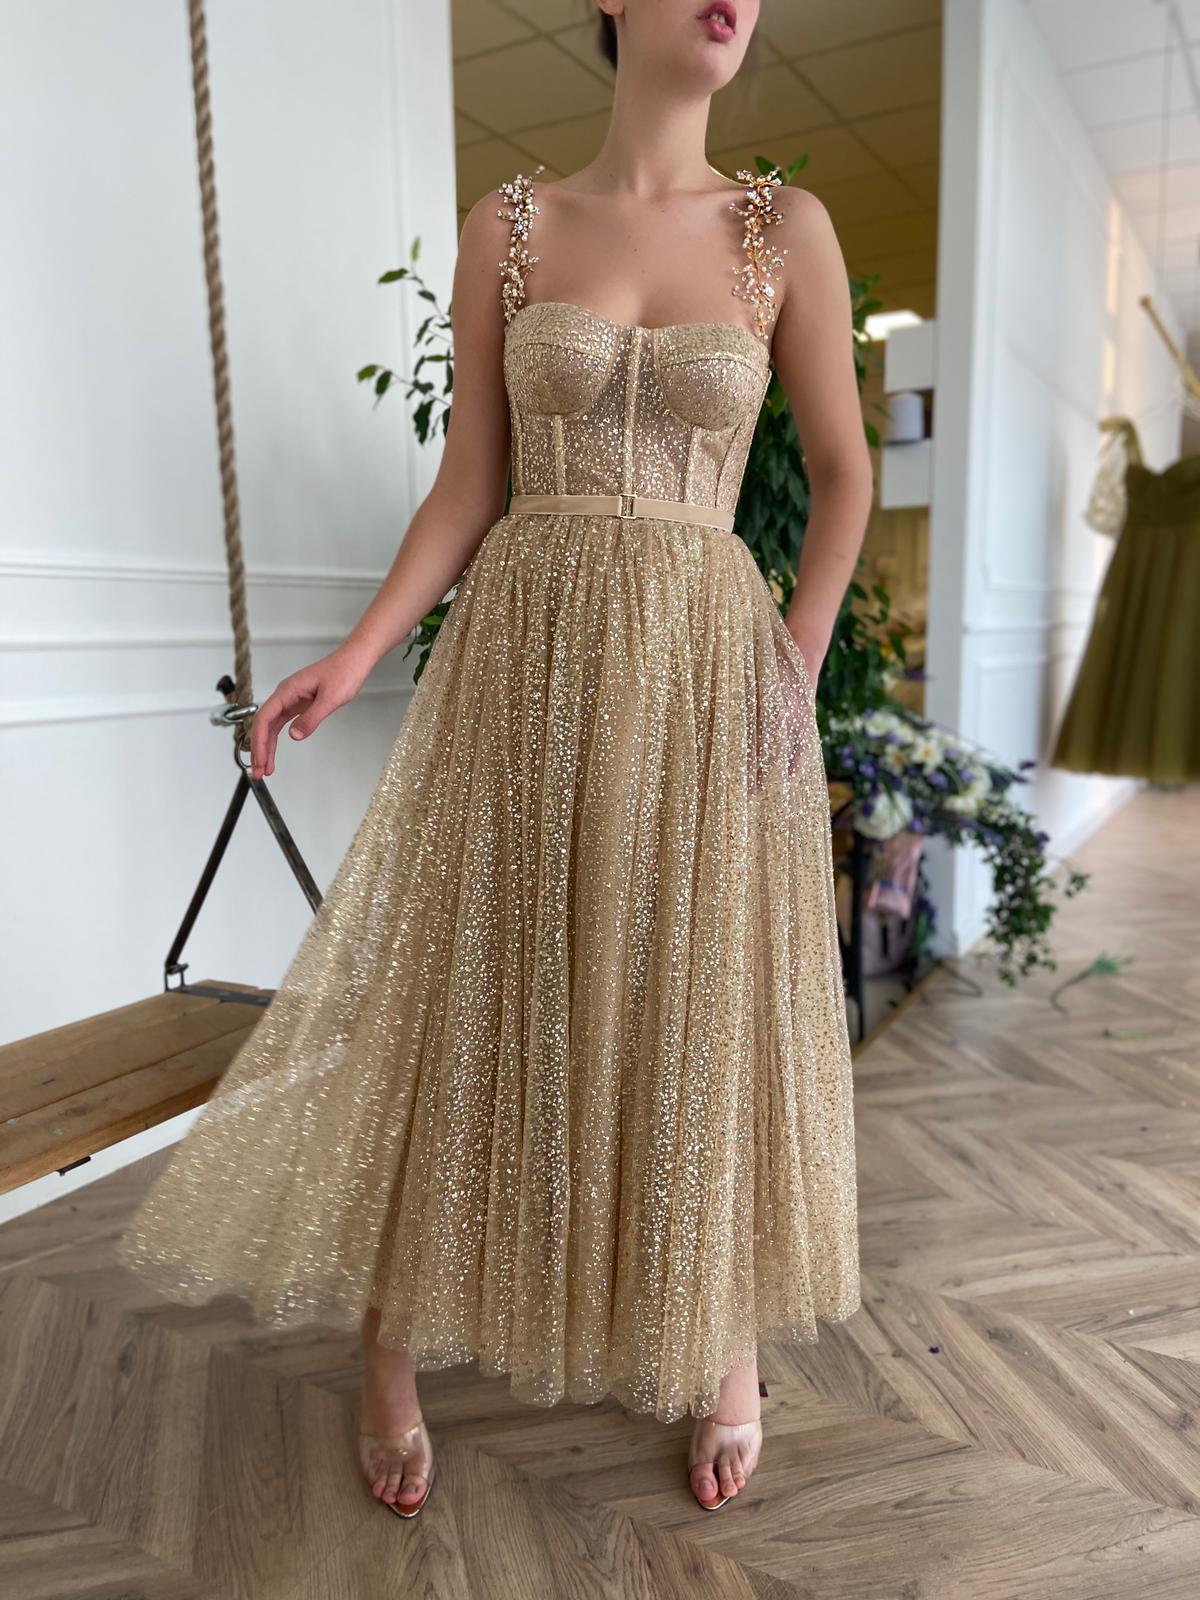 Gold midi dress with spaghetti straps, embroidery and belt